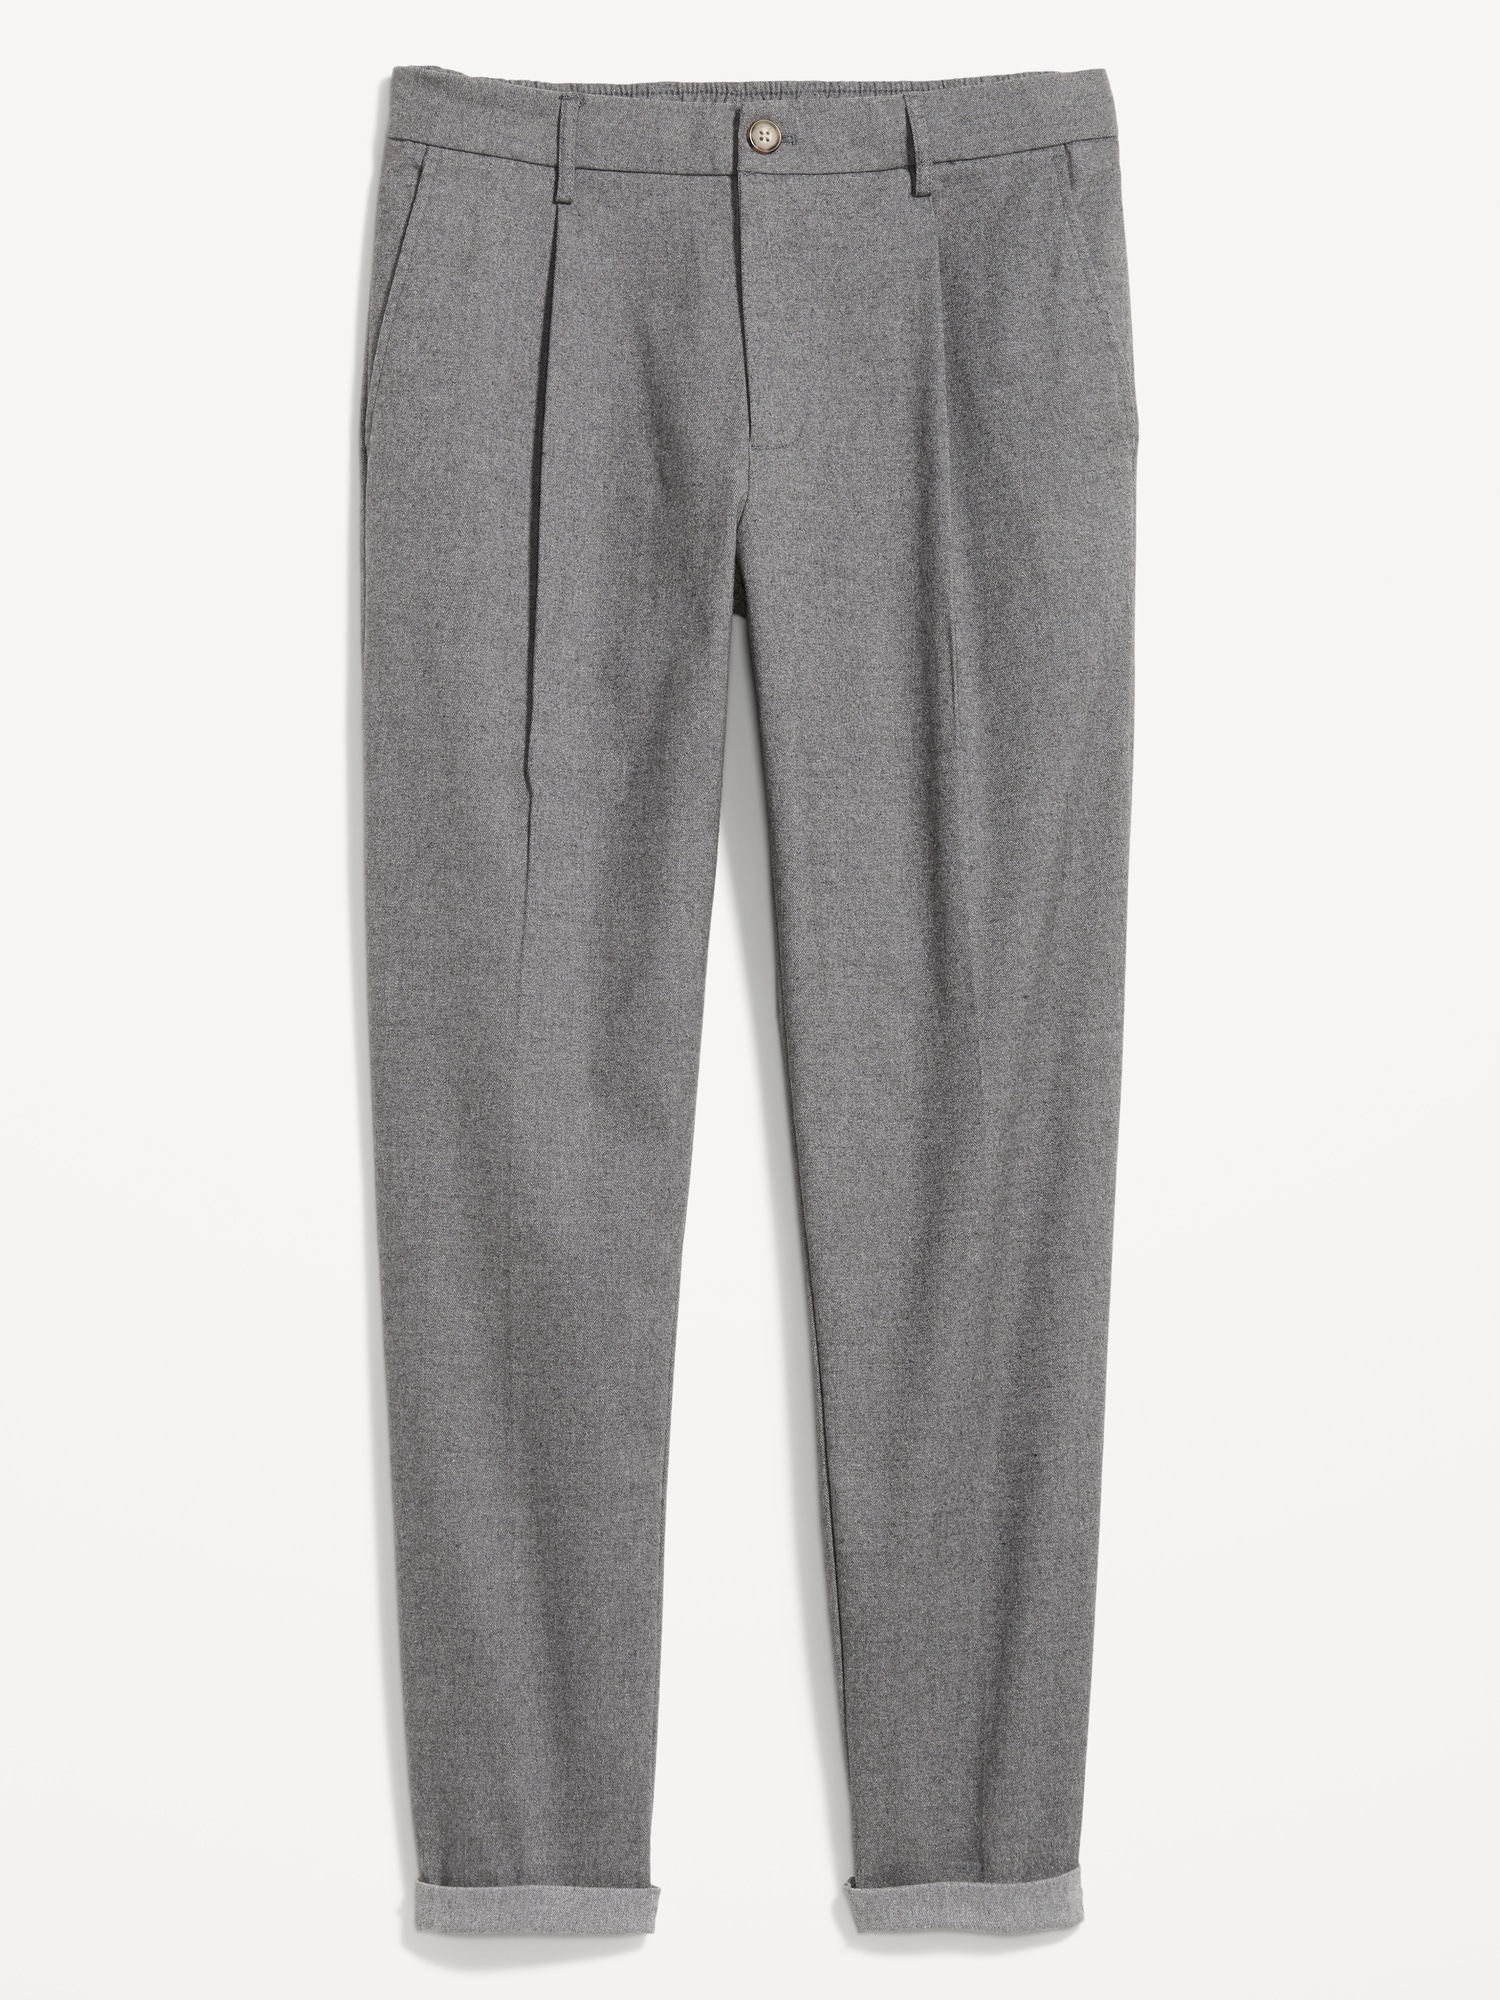 Pacelli Pleated Baggy Fit Navy Dress Pants